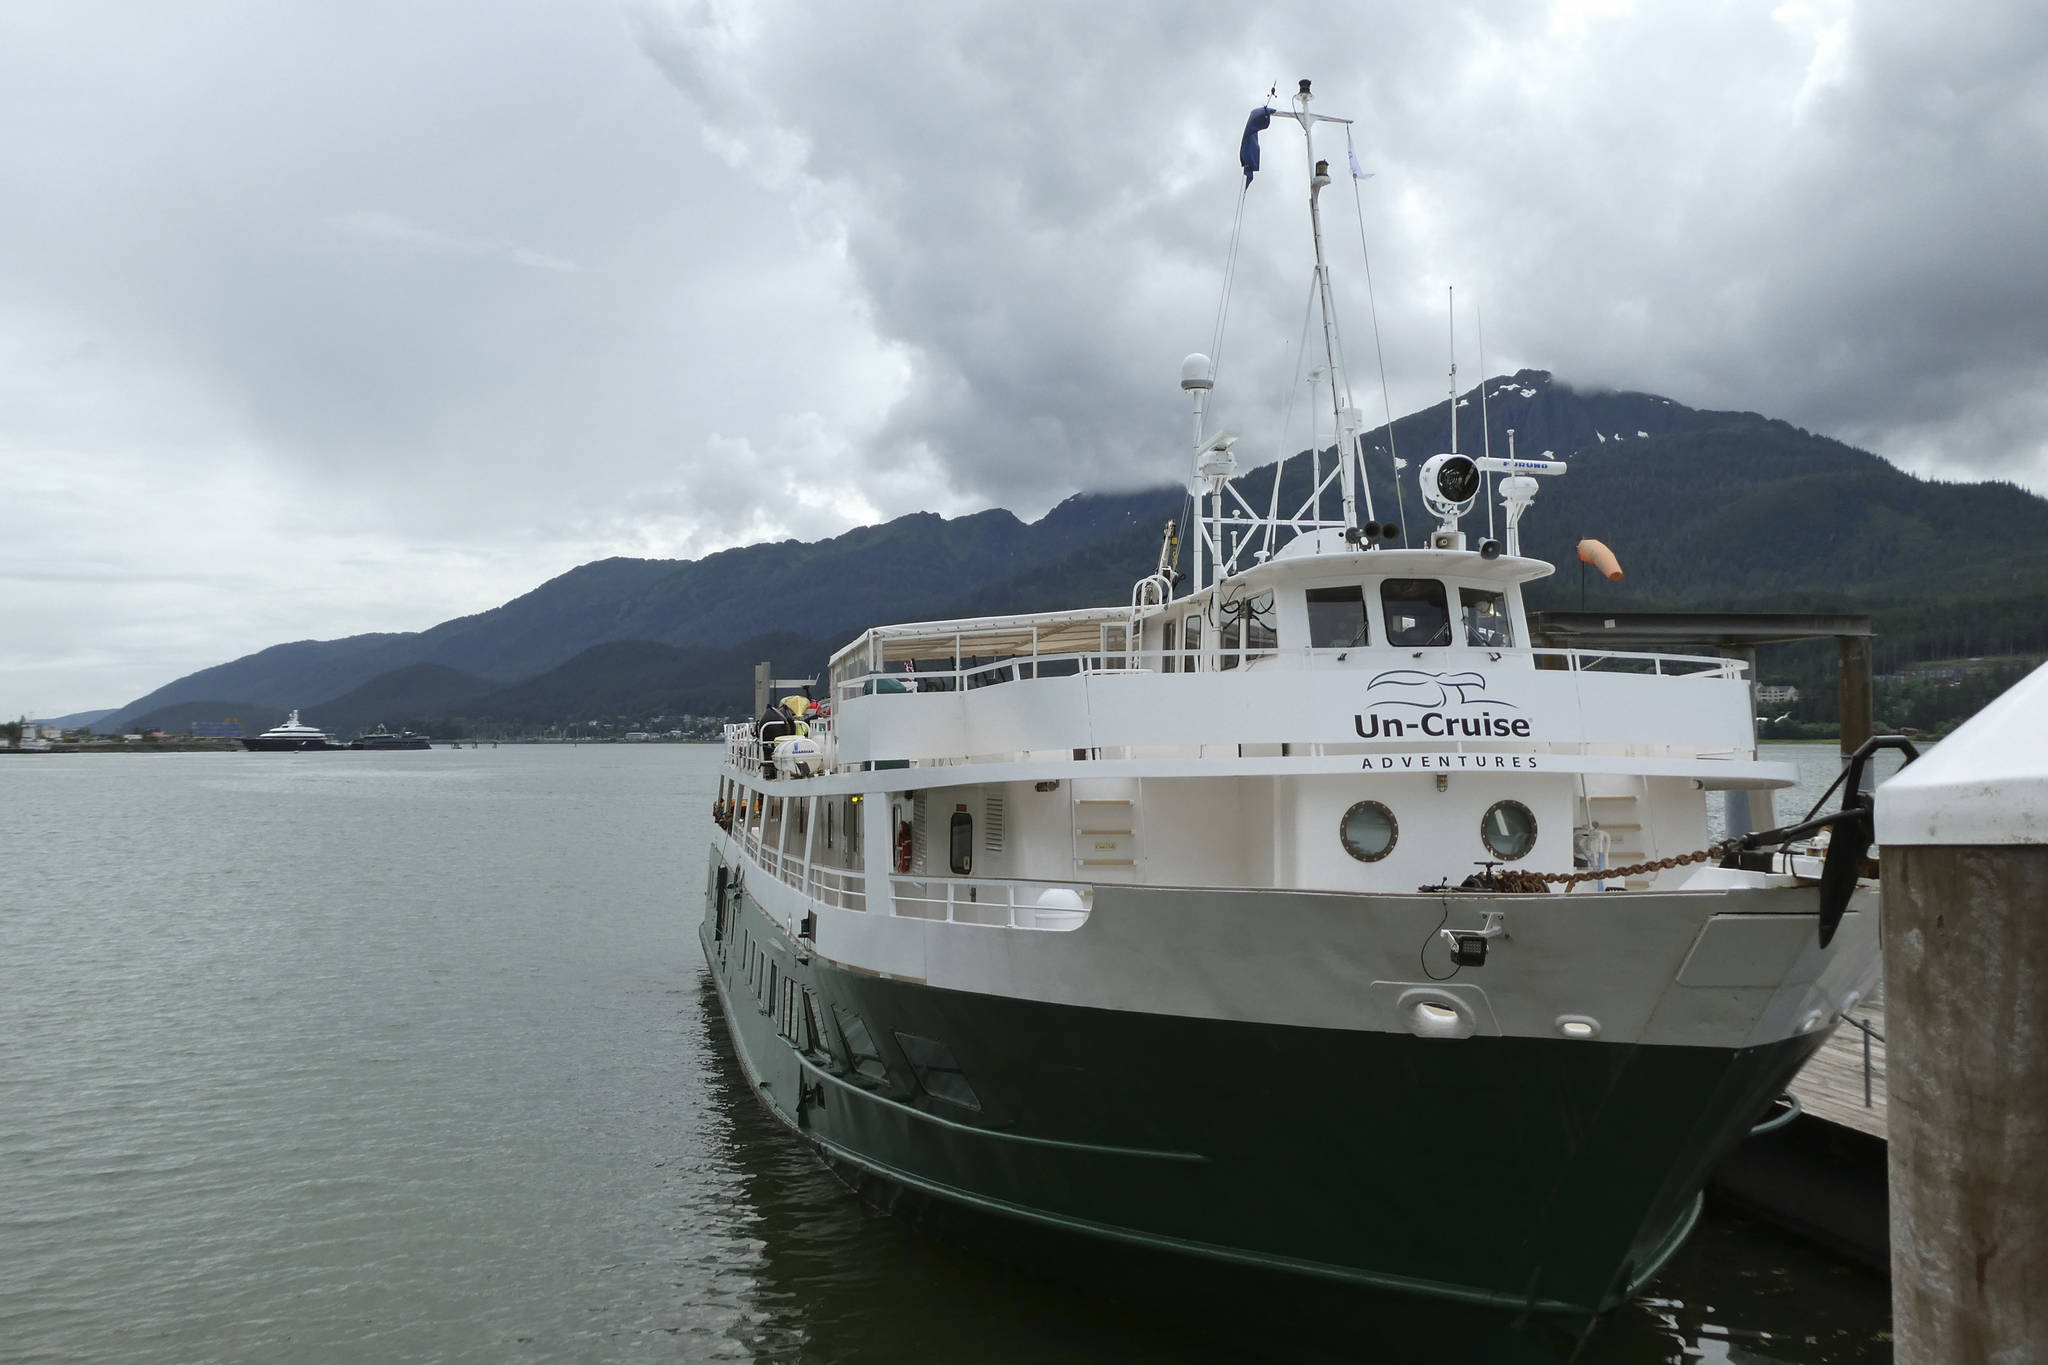 The Wilderness Adventurer is shown Wednesday, Aug. 5, 2020, following its return to Juneau, Alaska, after one of its 36 passengers tested positive for COVID-19. The first cruise of the stunted season was cut short, and all passengers were required to quarantine at a hotel while the 30 crew members were to quarantine on the ship. (AP Photo/Becky Bohrer)